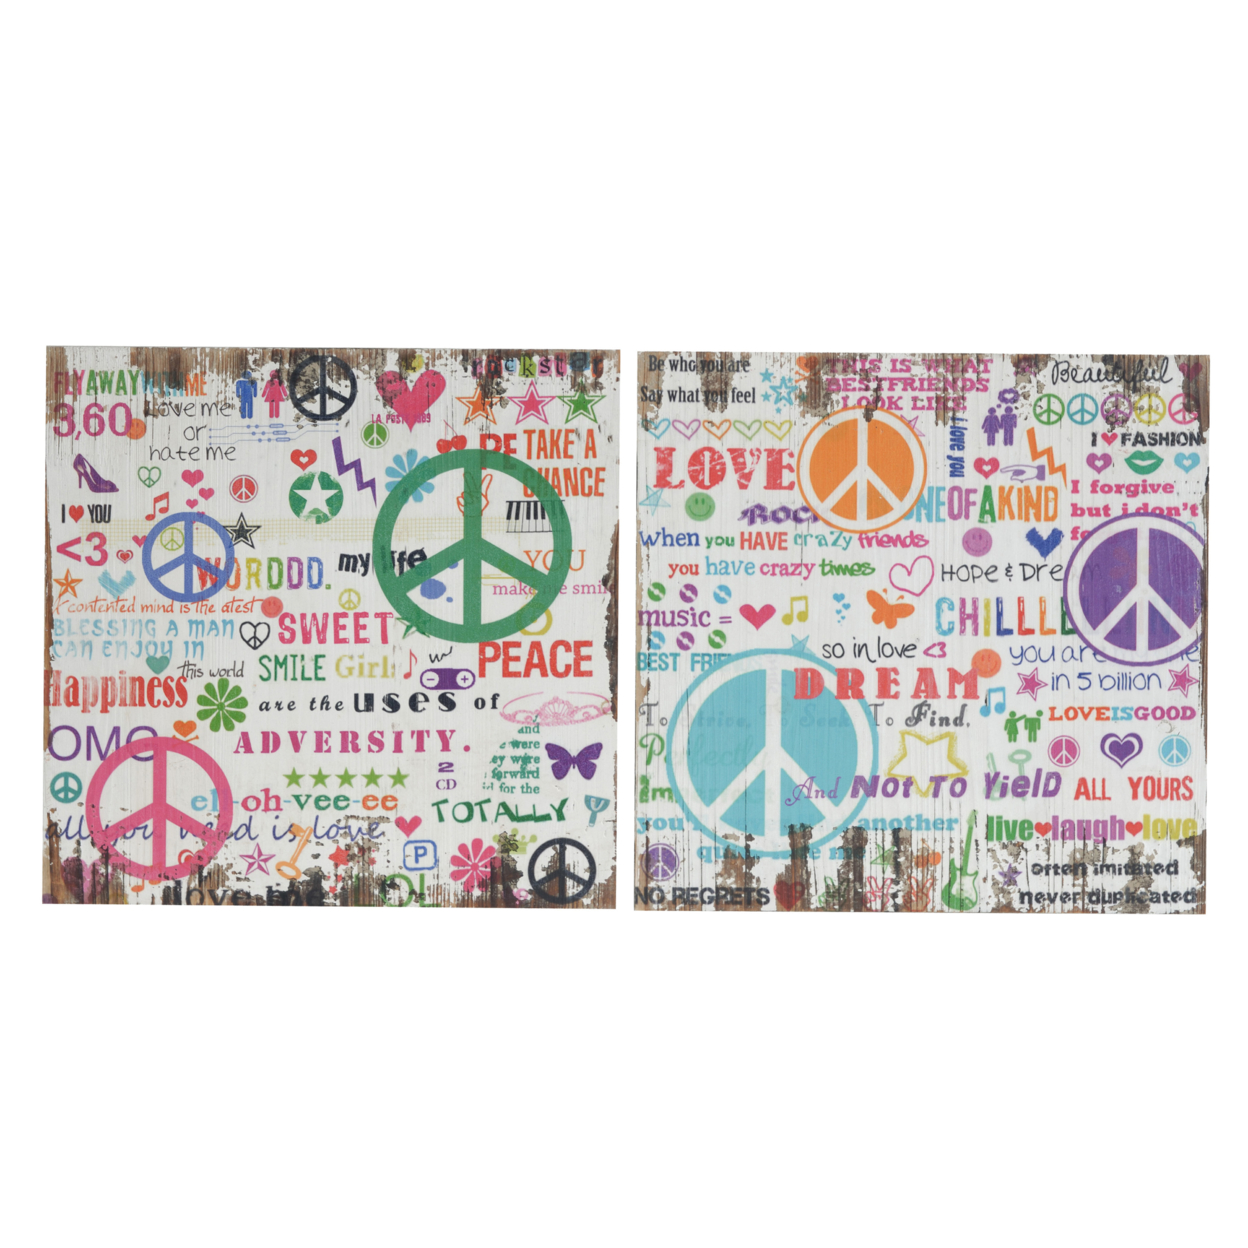 Distressed Wooden Wall Plaques With Colorful Doodles, Set Of 2- Saltoro Sherpi